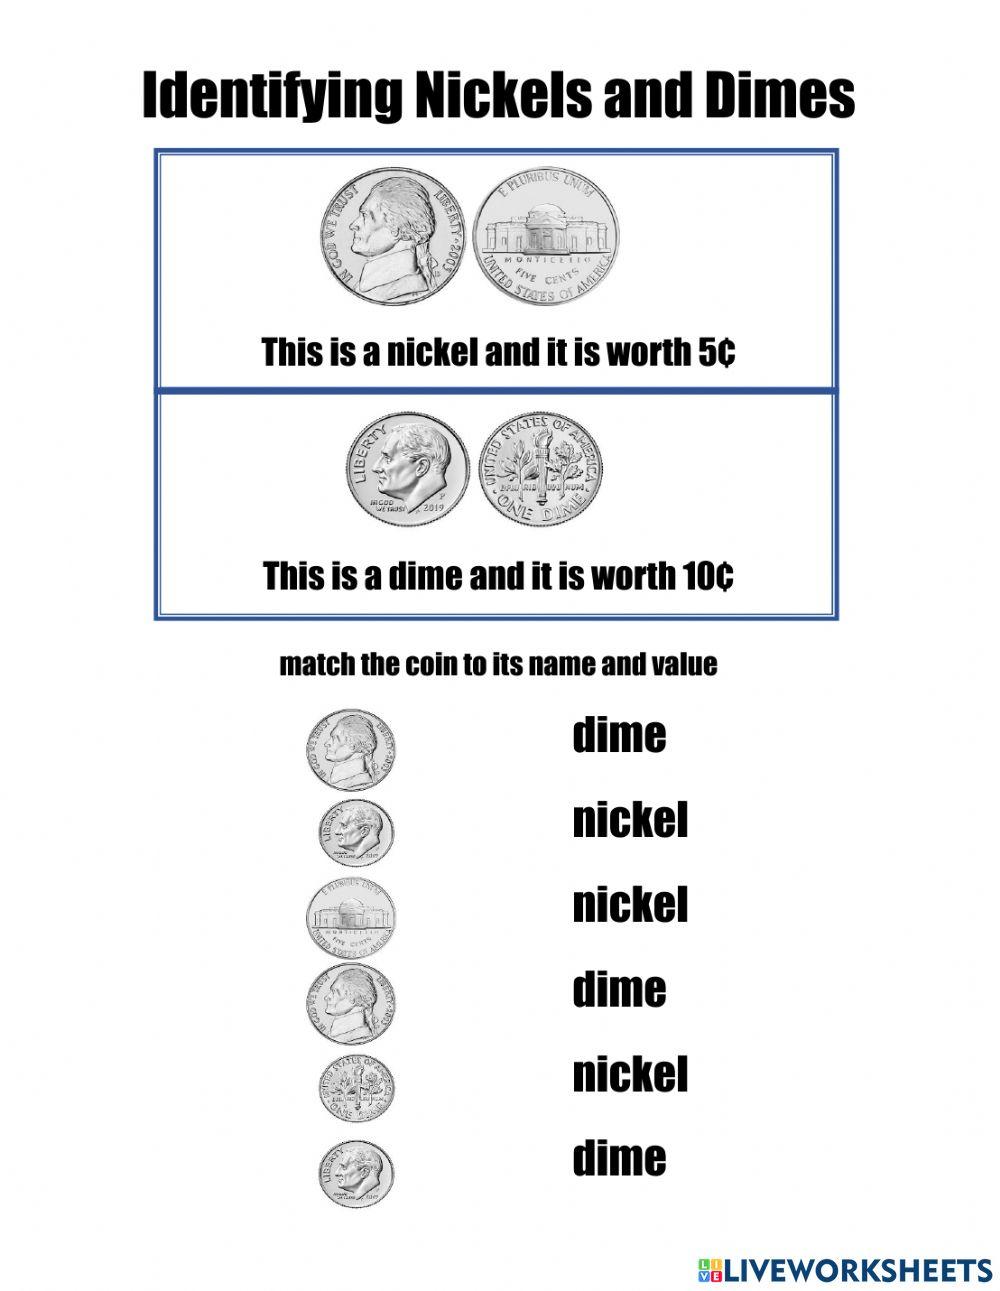 Nickels and Dimes